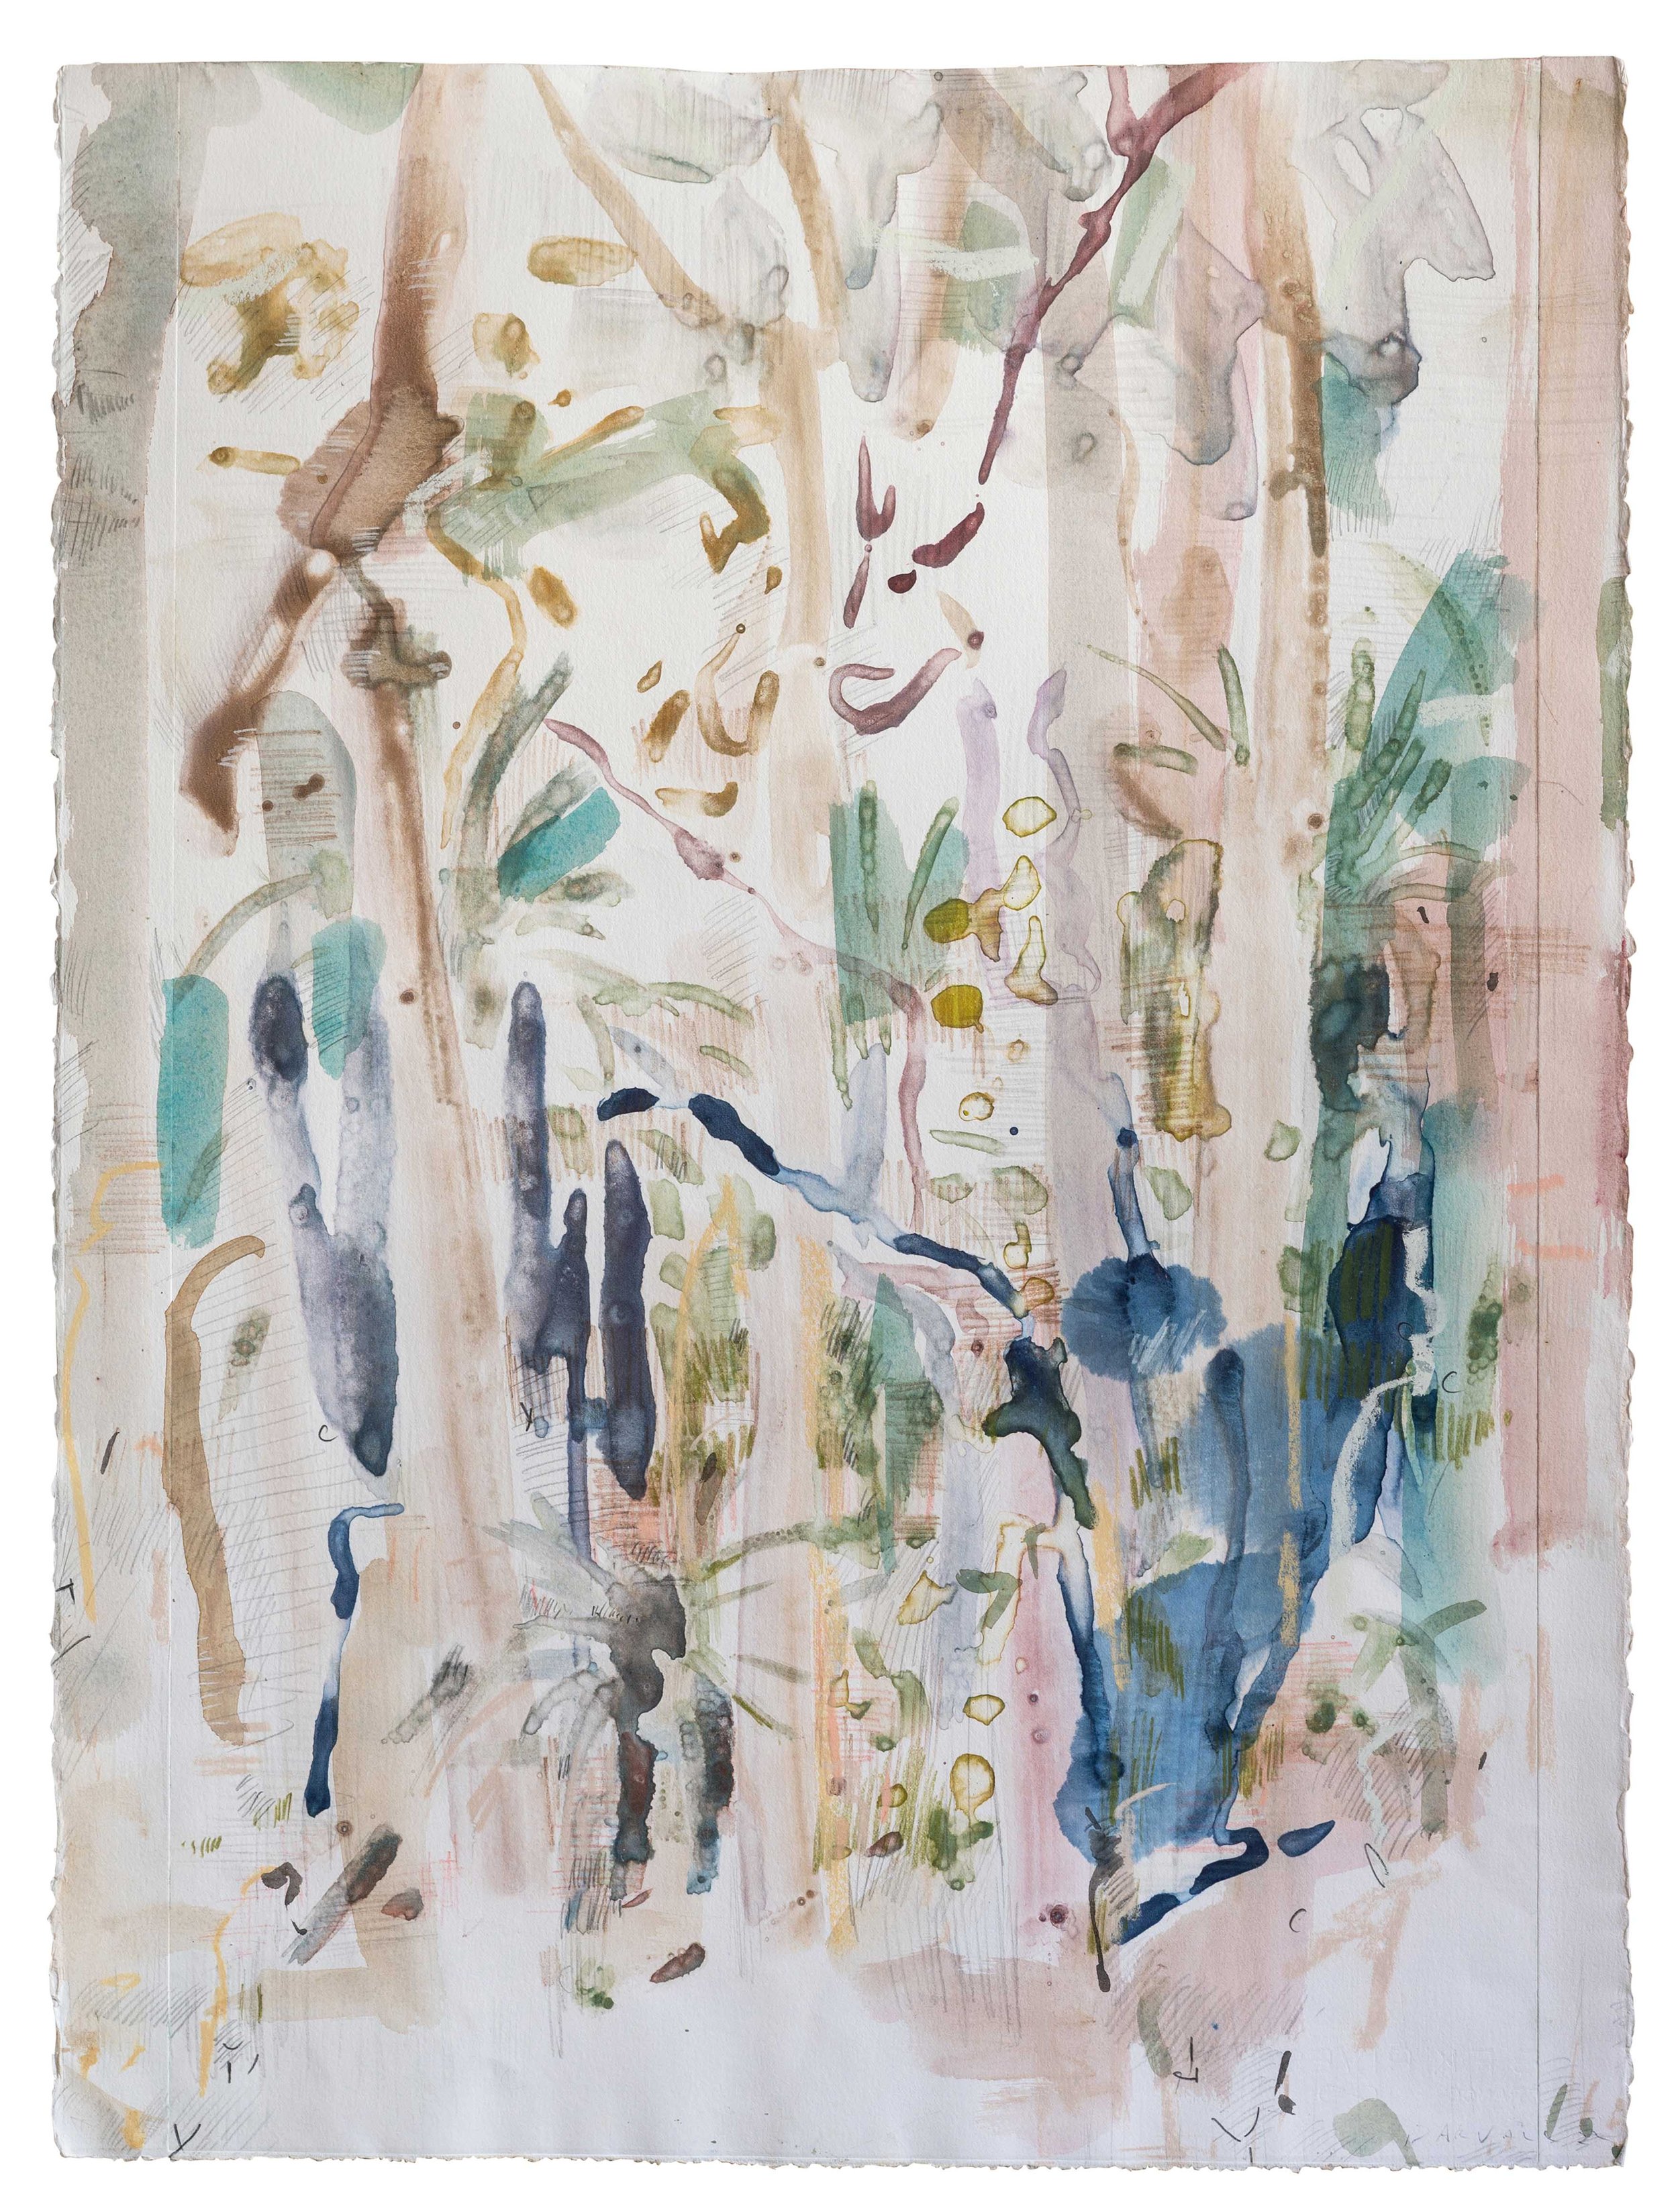   Boranup Forest D  2022  68 x 88 cm watercolour monoprint pencil on Arches BFK   Touring exhibition  2021-2022 The SWAN Form, Bunbry Biennale. (collected)  